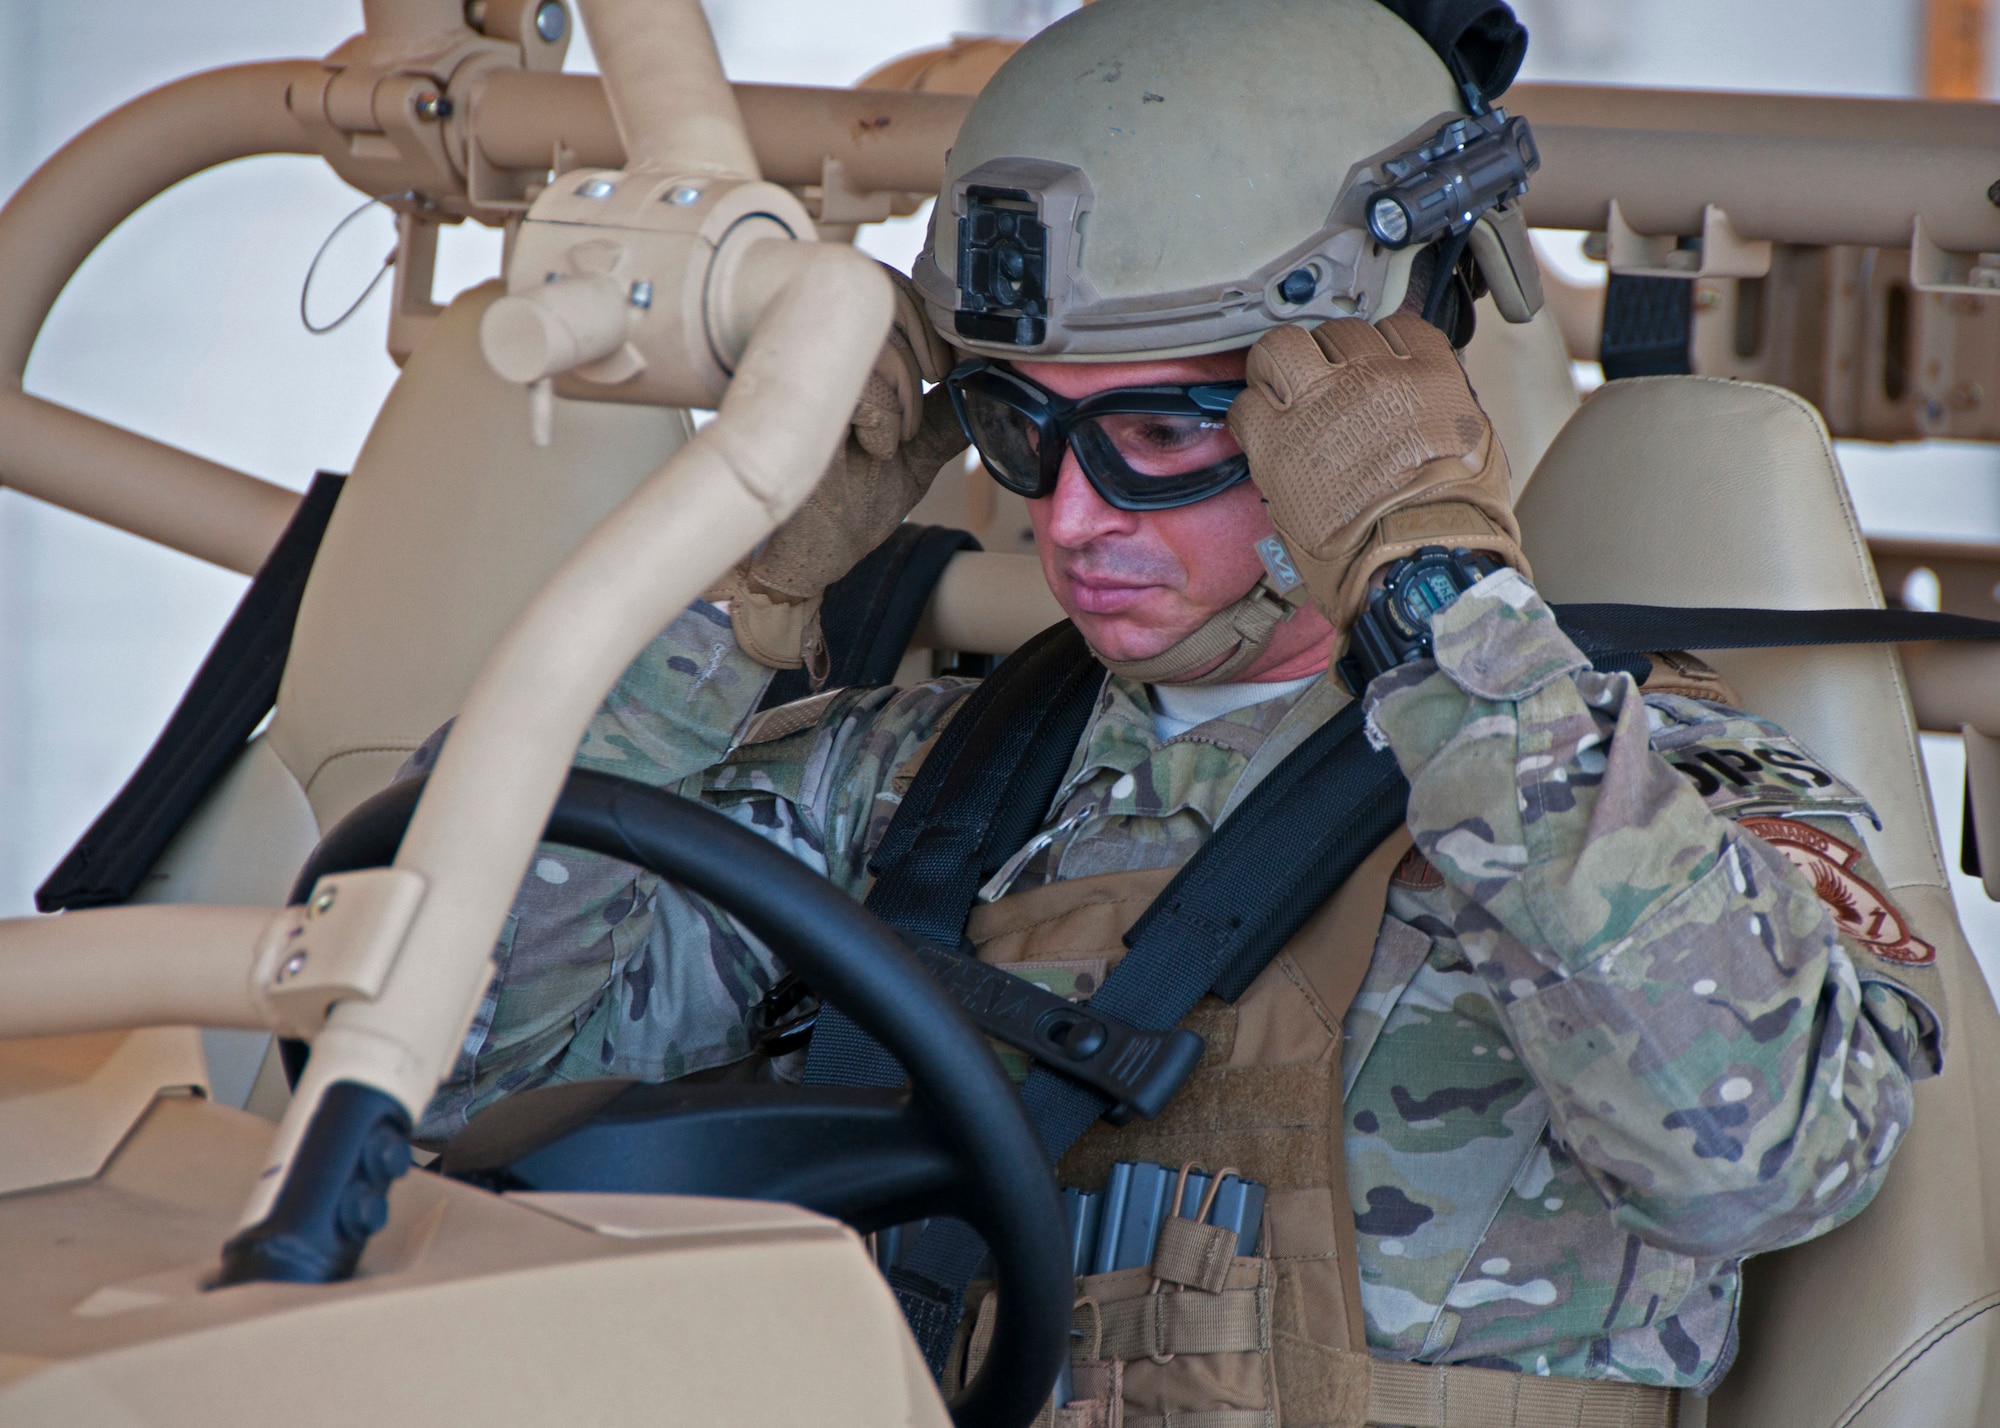 Staff Sgt. Daniel Ordoqui, 919th Special Operations Security Forces Squadron, adjusts his protective eyewear as he prepares to depart on a specialized RAZR all-terrain vehicle June 4, 2018 at Duke Field, Fla.